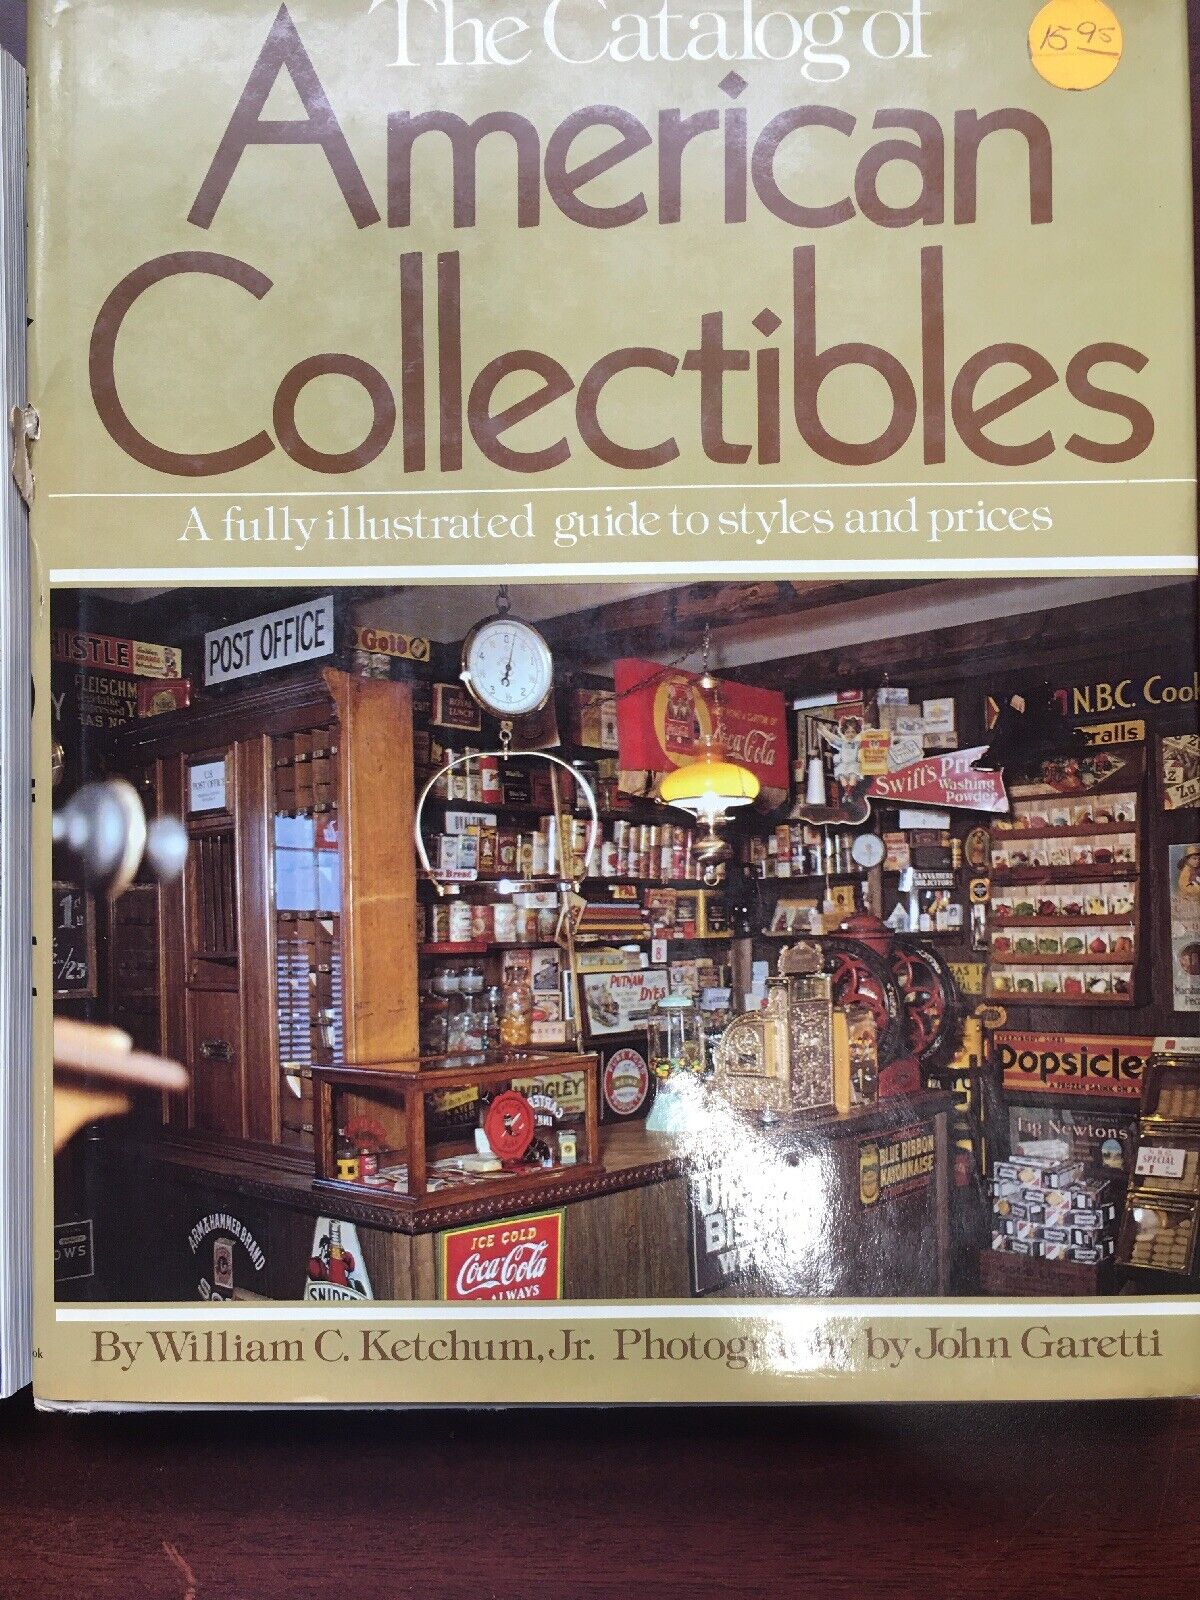 Mix To Book Light Country Americana Grotz’s Antique Guide American Collectibles Без бренда - фотография #4